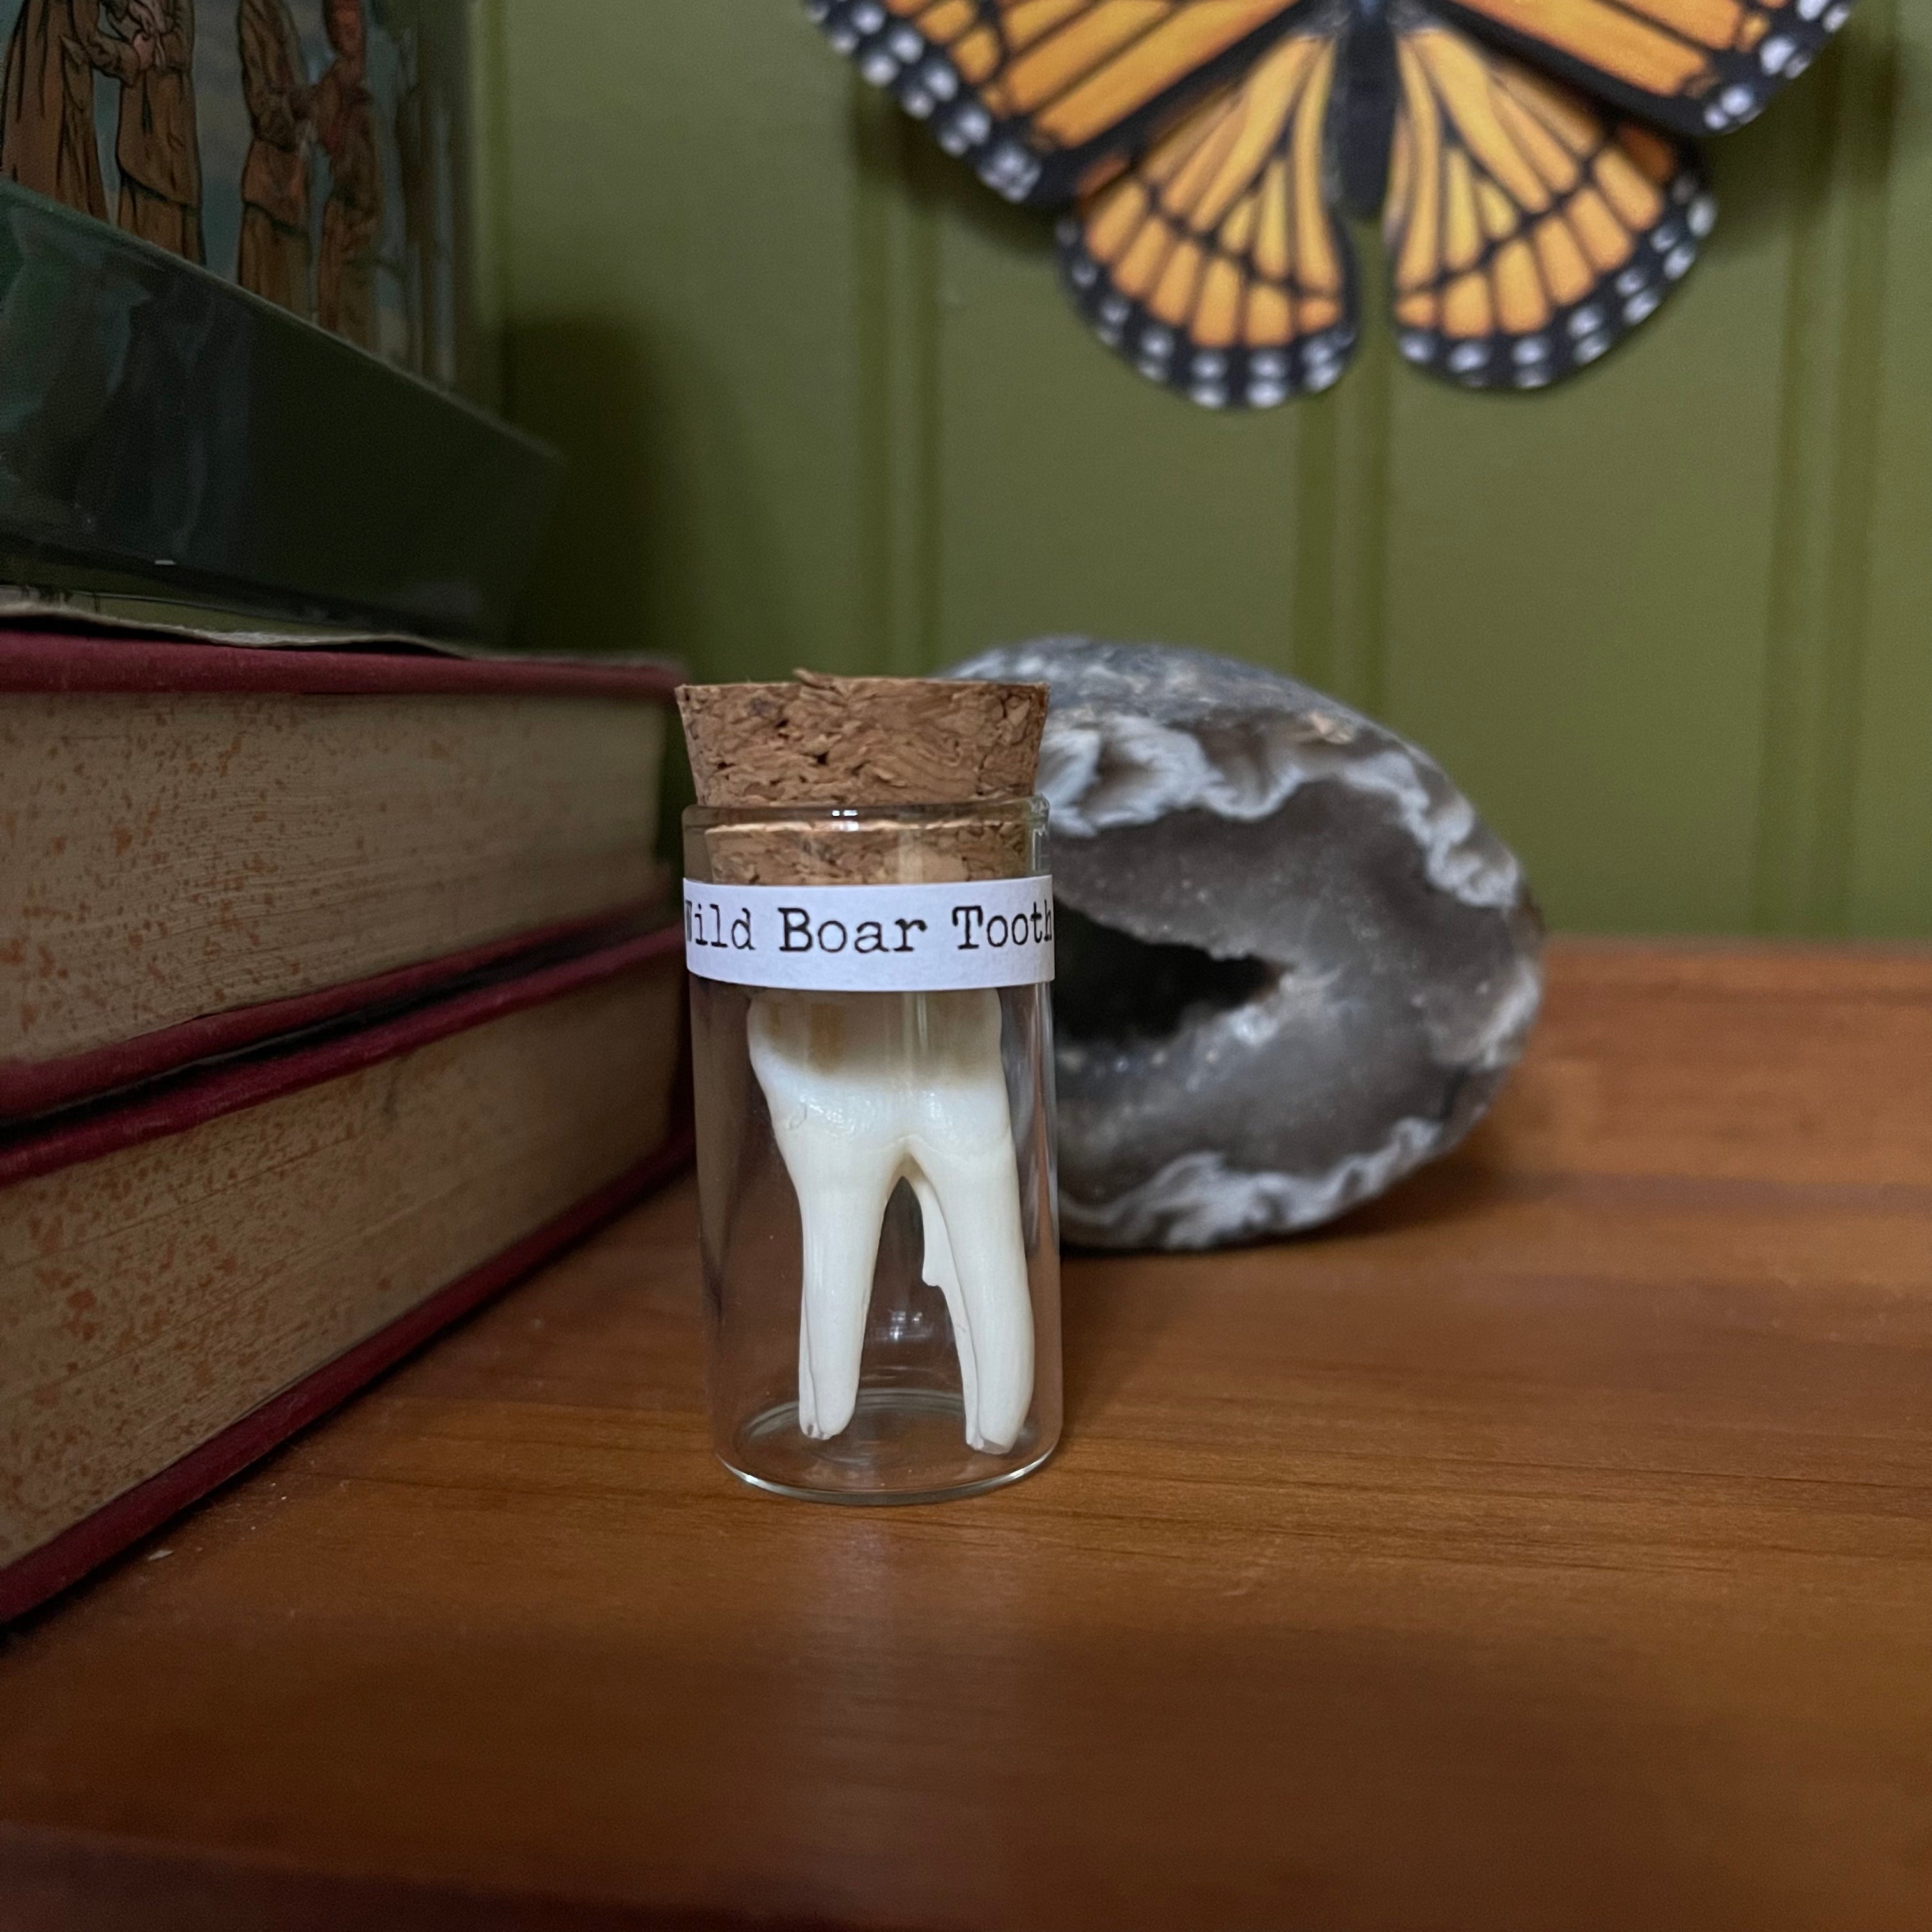 Wild Boar Tooth in Vial